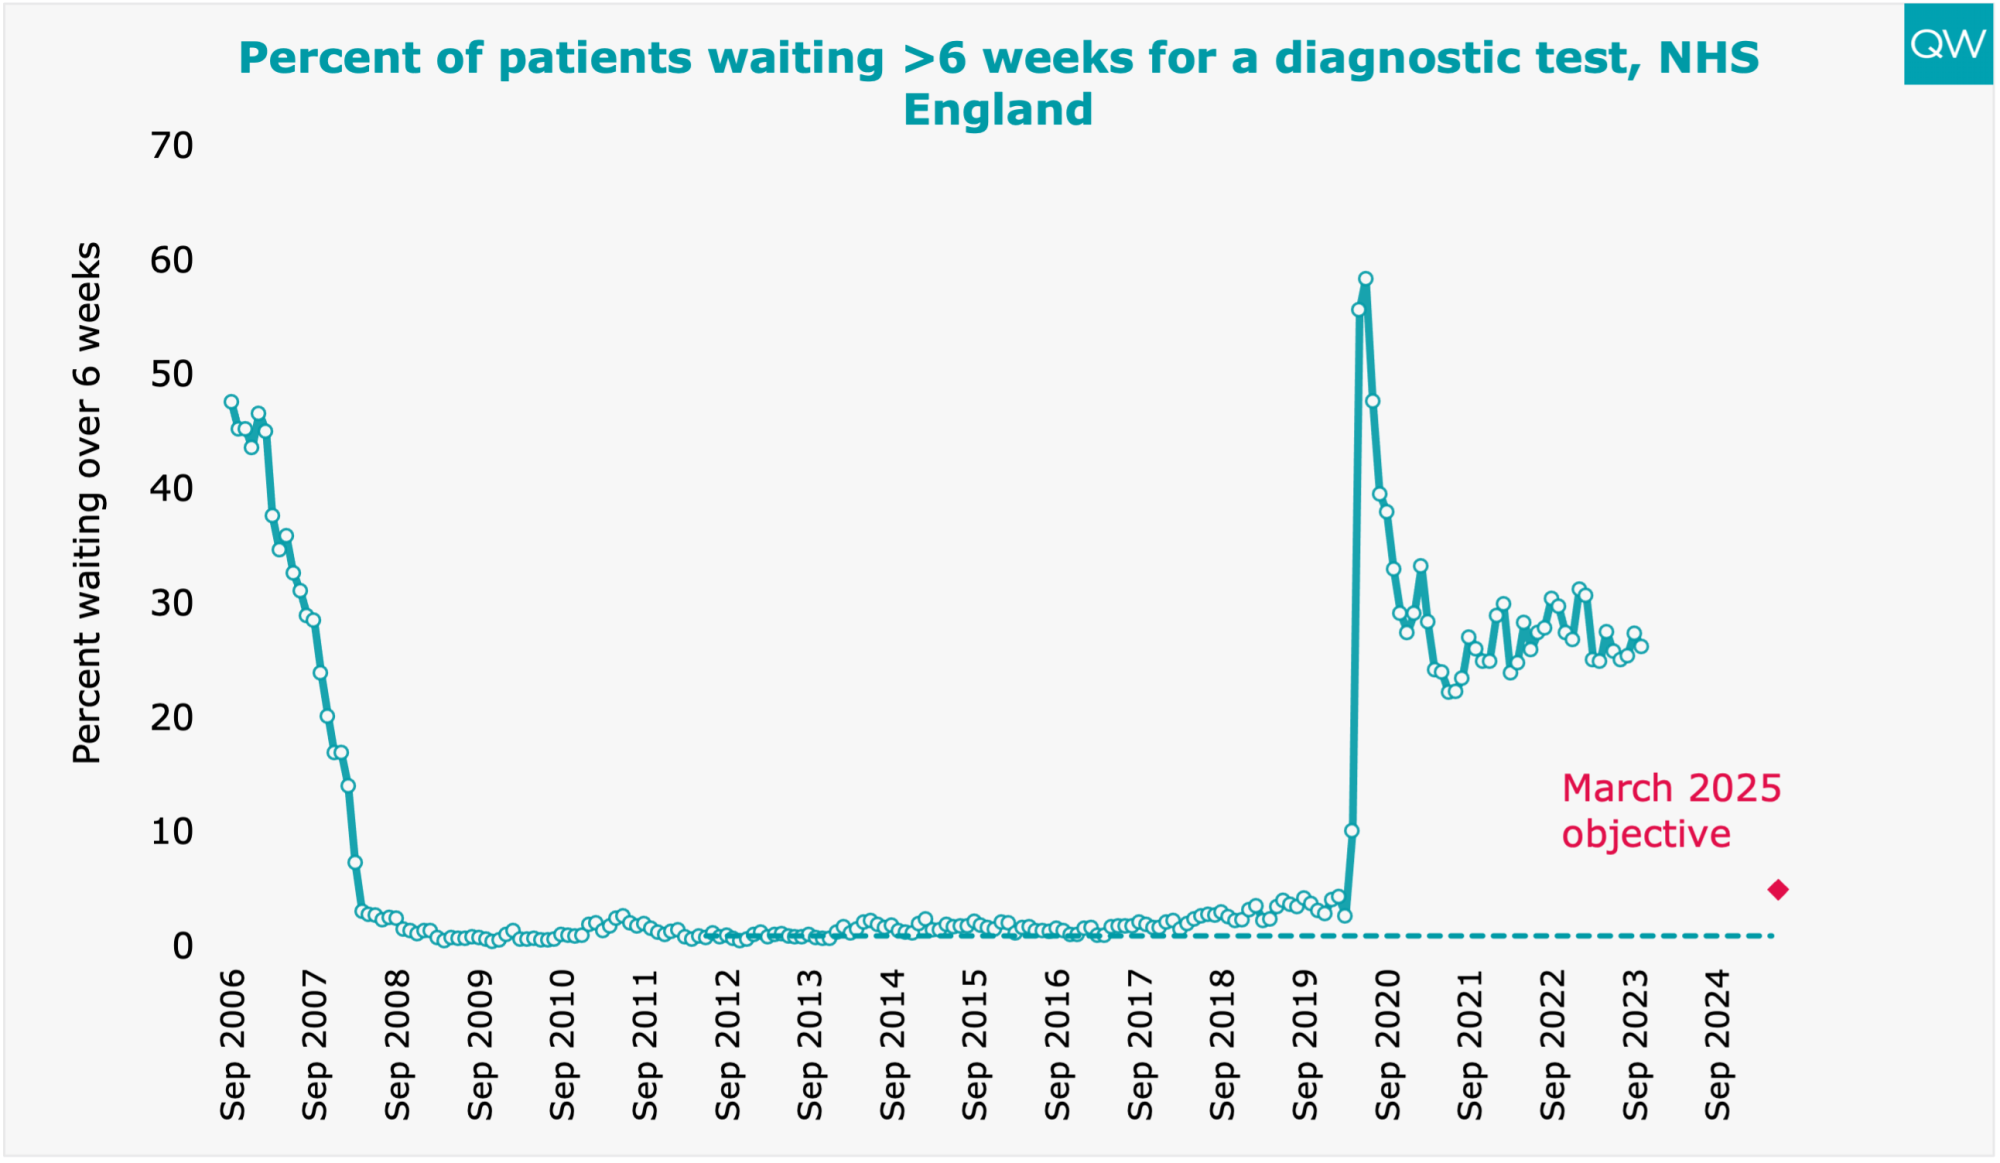 The number of people waiting more than 6 weeks for a diagnostic test is still very high and well off the target